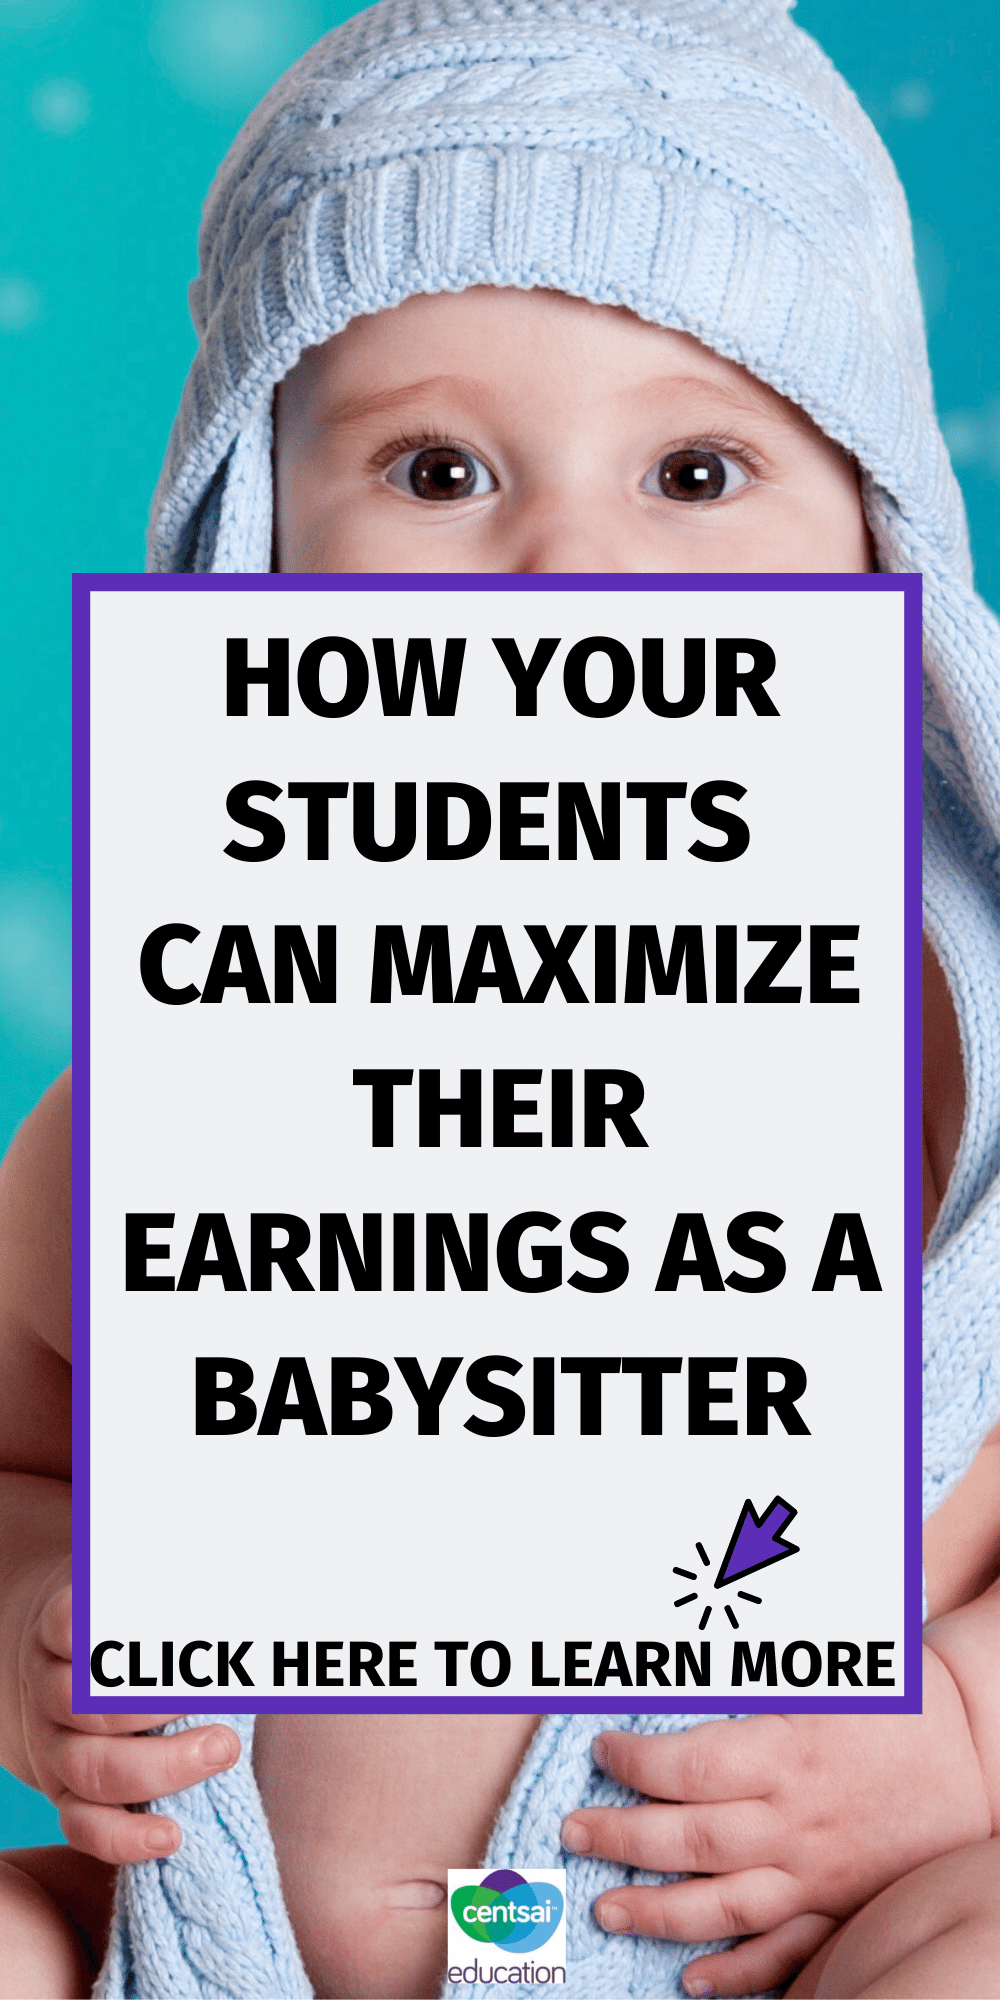 Tons of high school students earn money babysitting. Here are some practical tips to help them earn as much as possible! #Makemoneyincollege #howmakemoney #makeextramoney #makequickcash